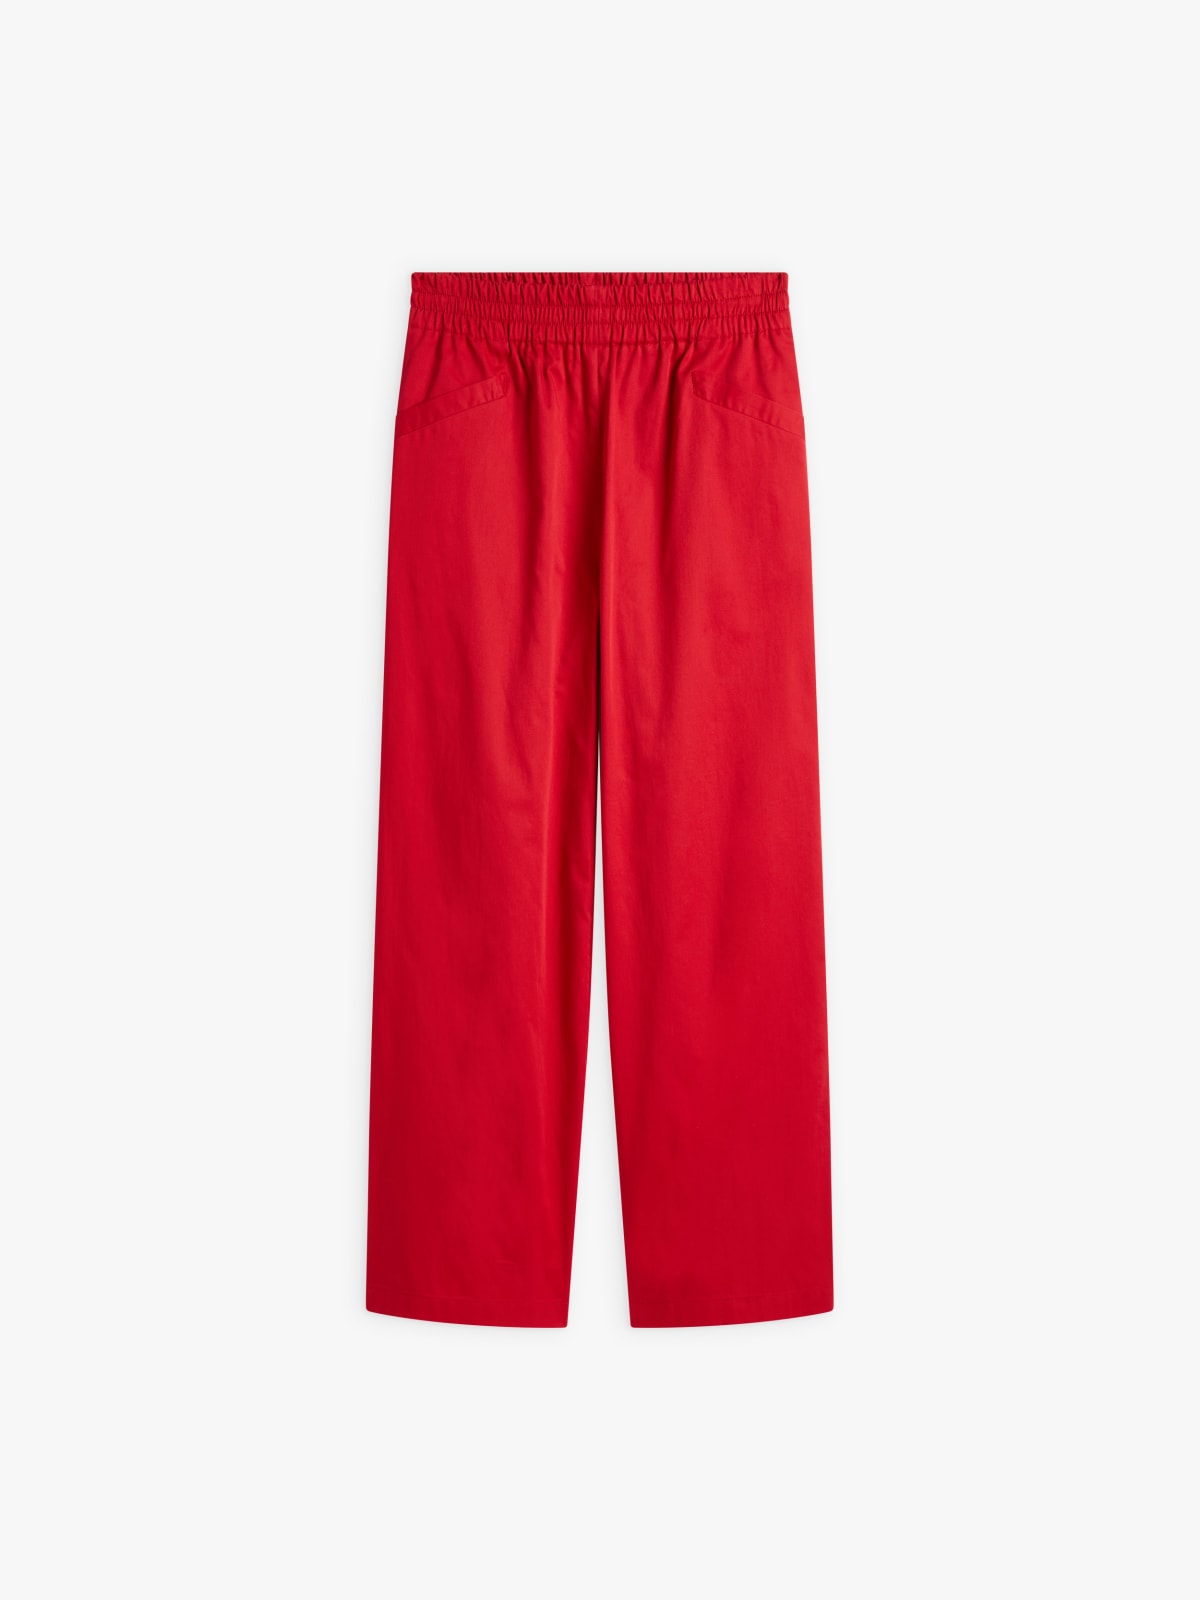 red cotton New Moulin wide-leg pants